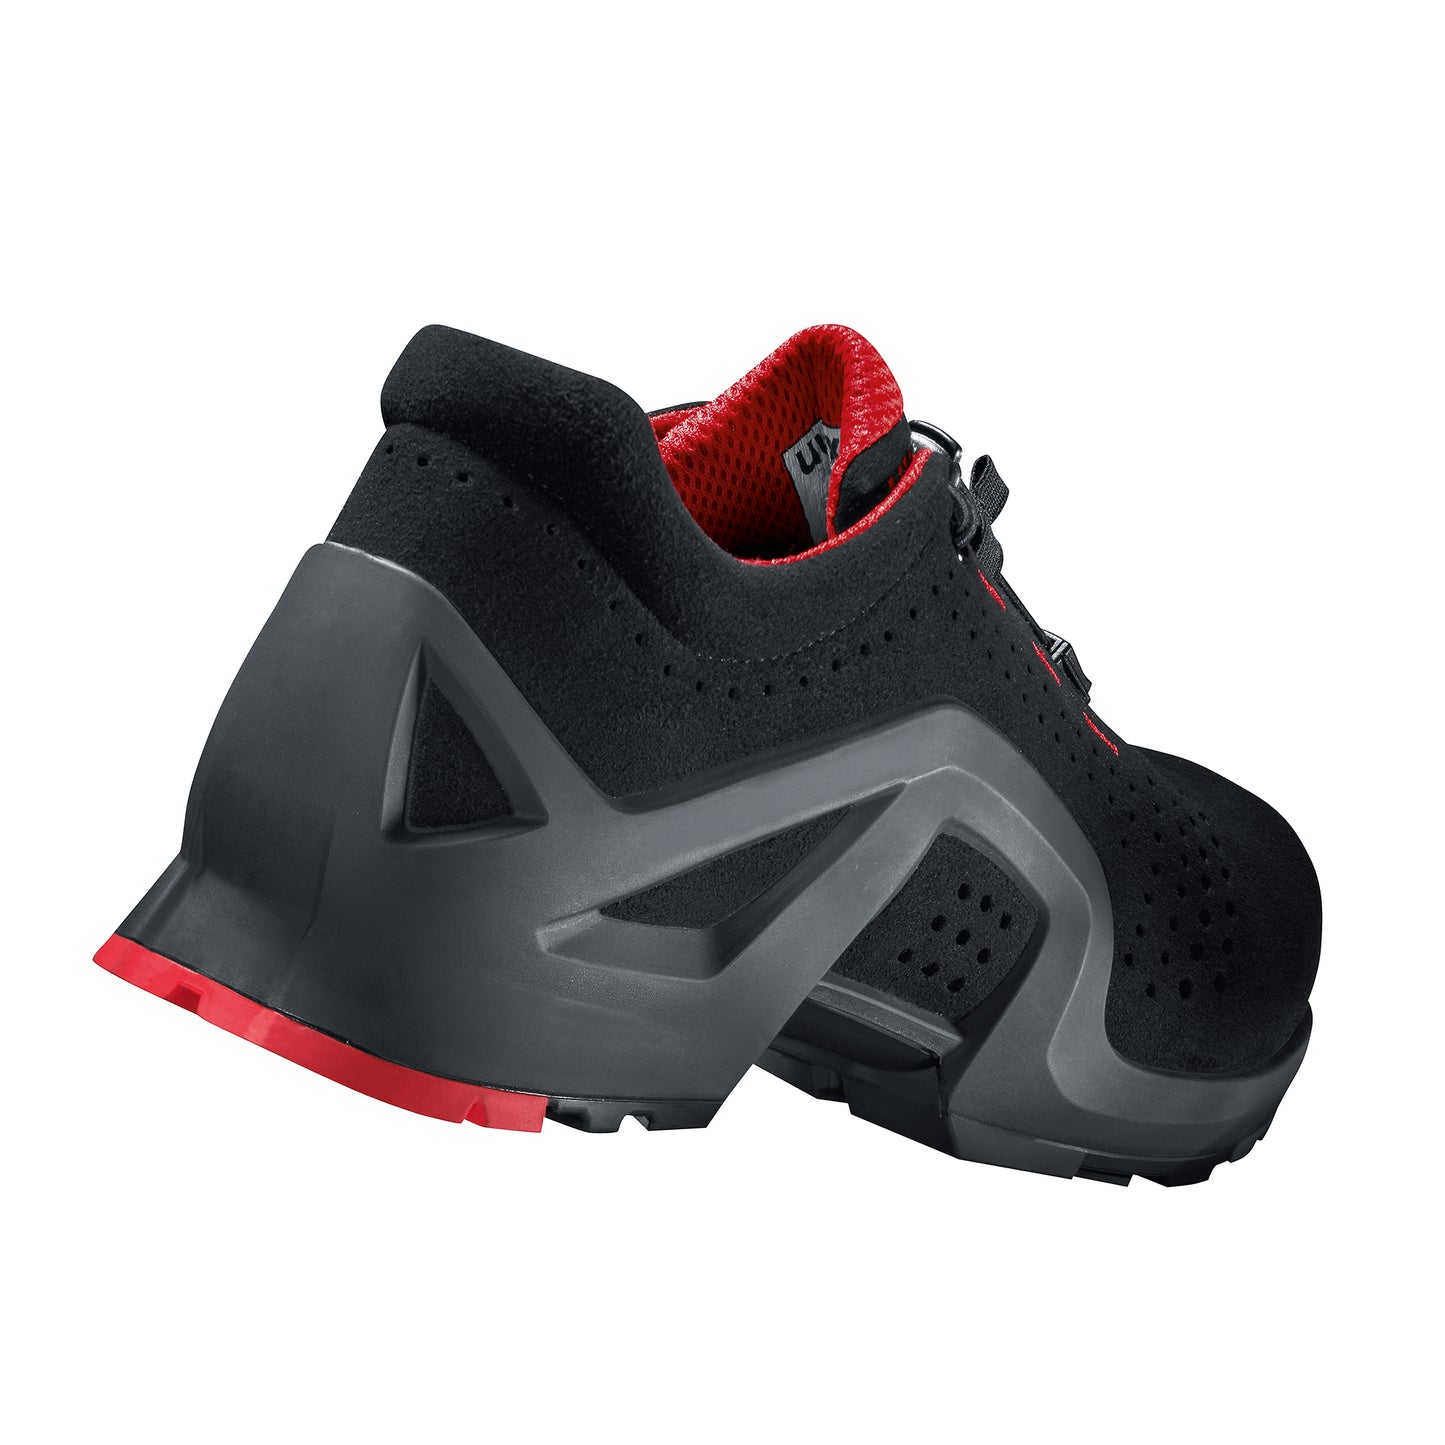 uvex 1 safety trainers S1SRC ESD Non-slip outsole, oil and petrol resistant. Breathable microvelour upper. Lightweight, metal-free toe cap. protexU